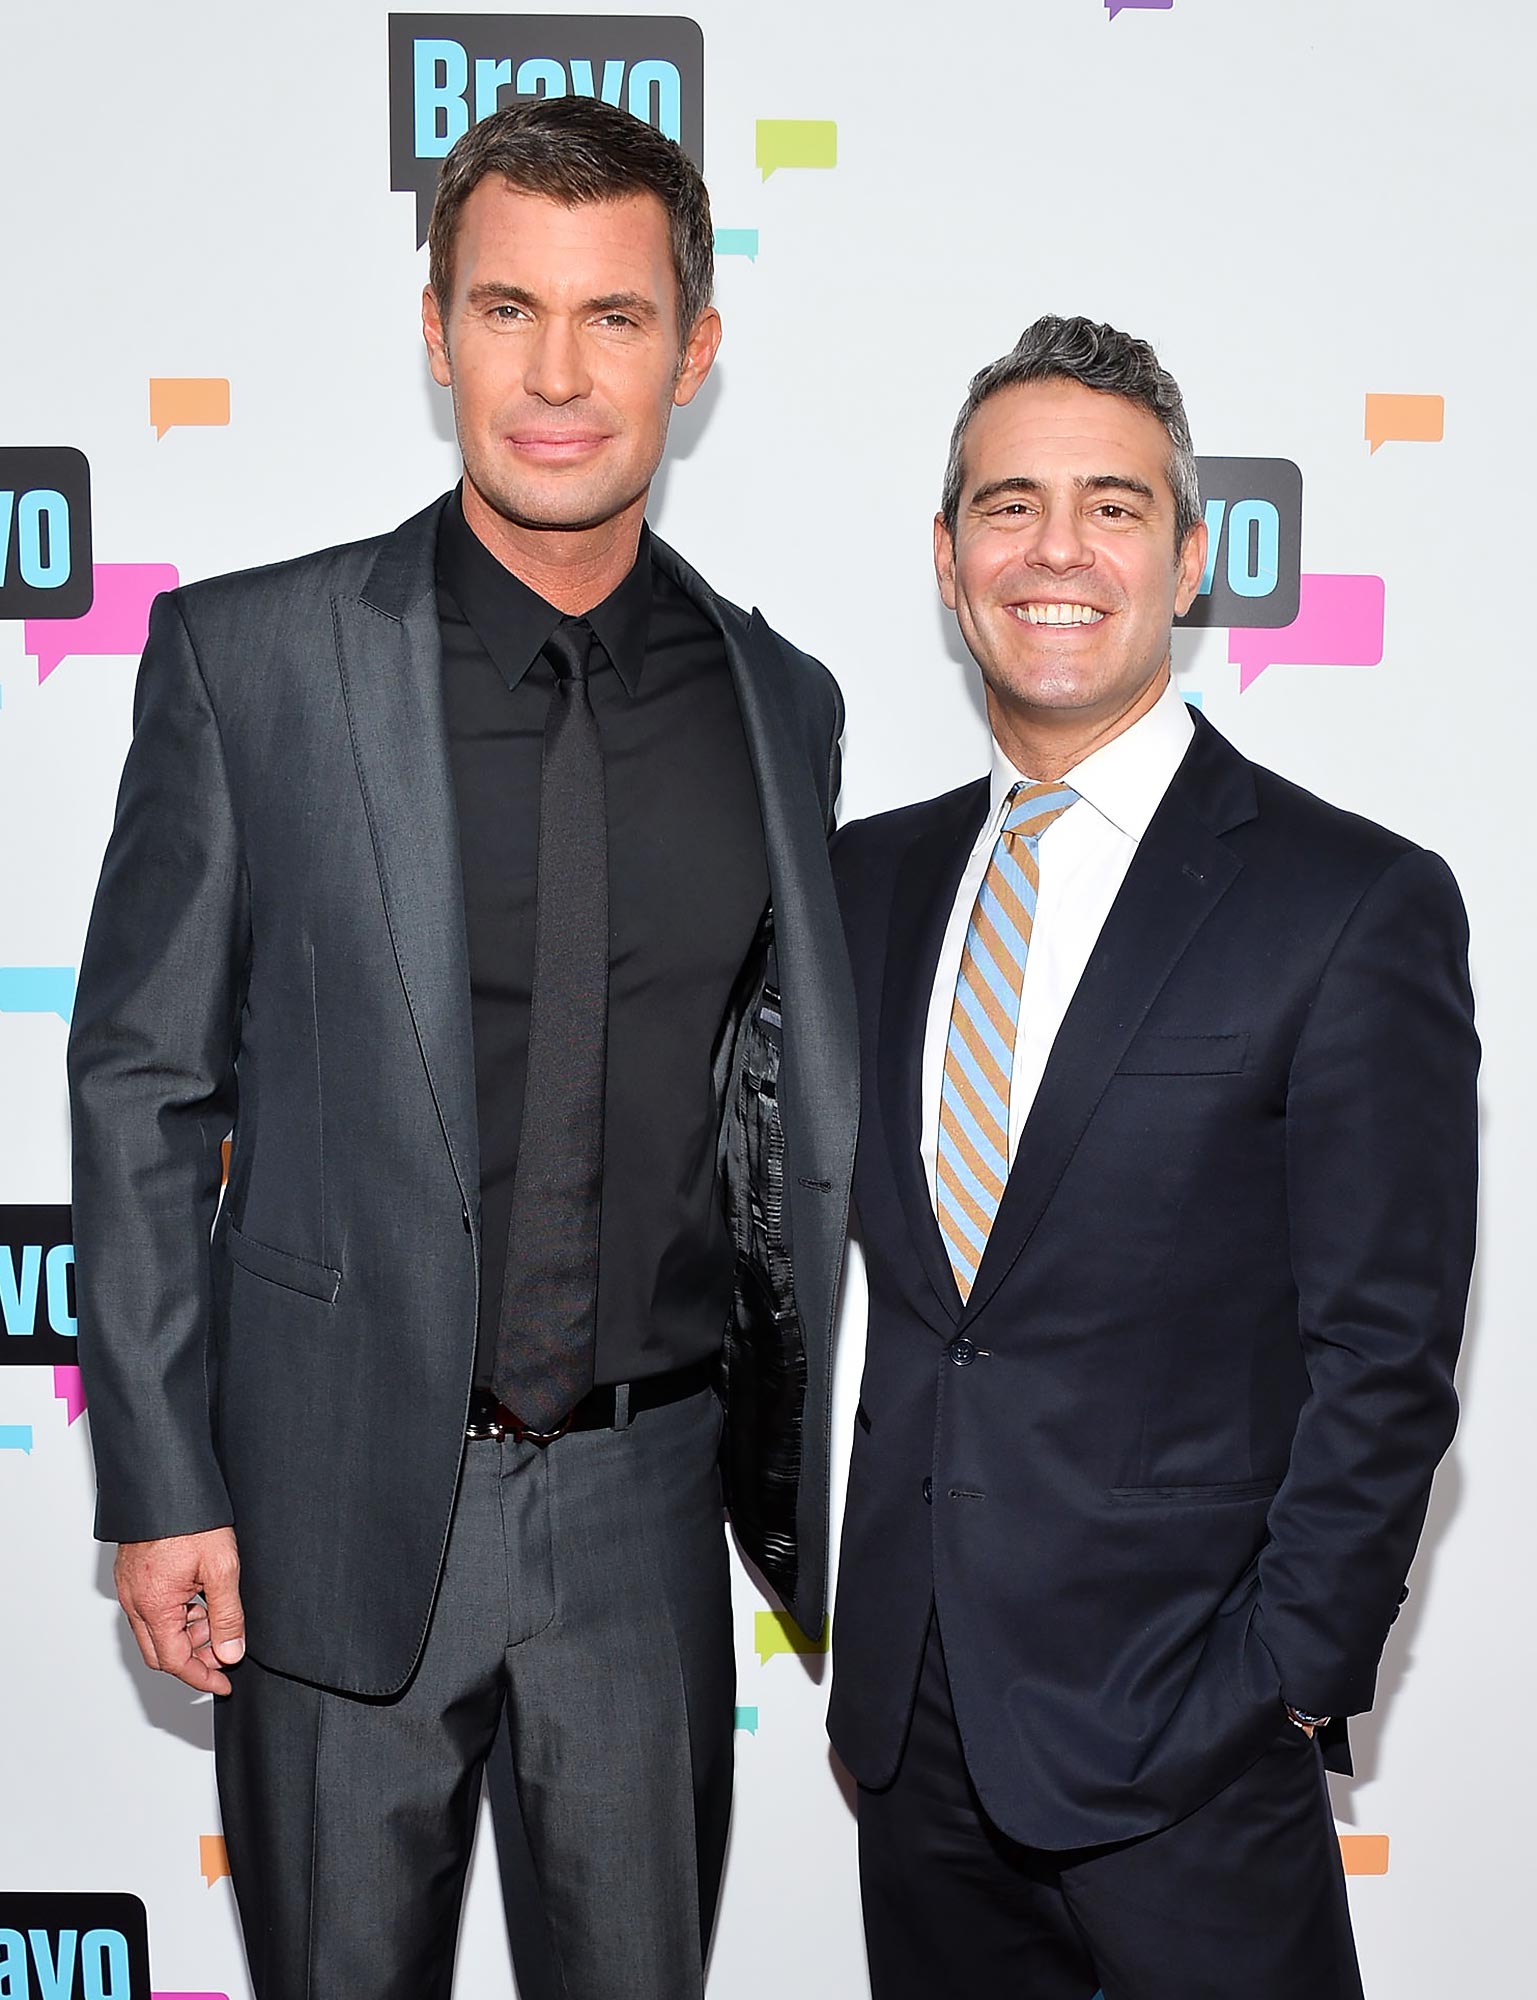 Andy Cohen Discusses 'Real Housewives of Orange County' Season 18 Casting With Jeff Lewis